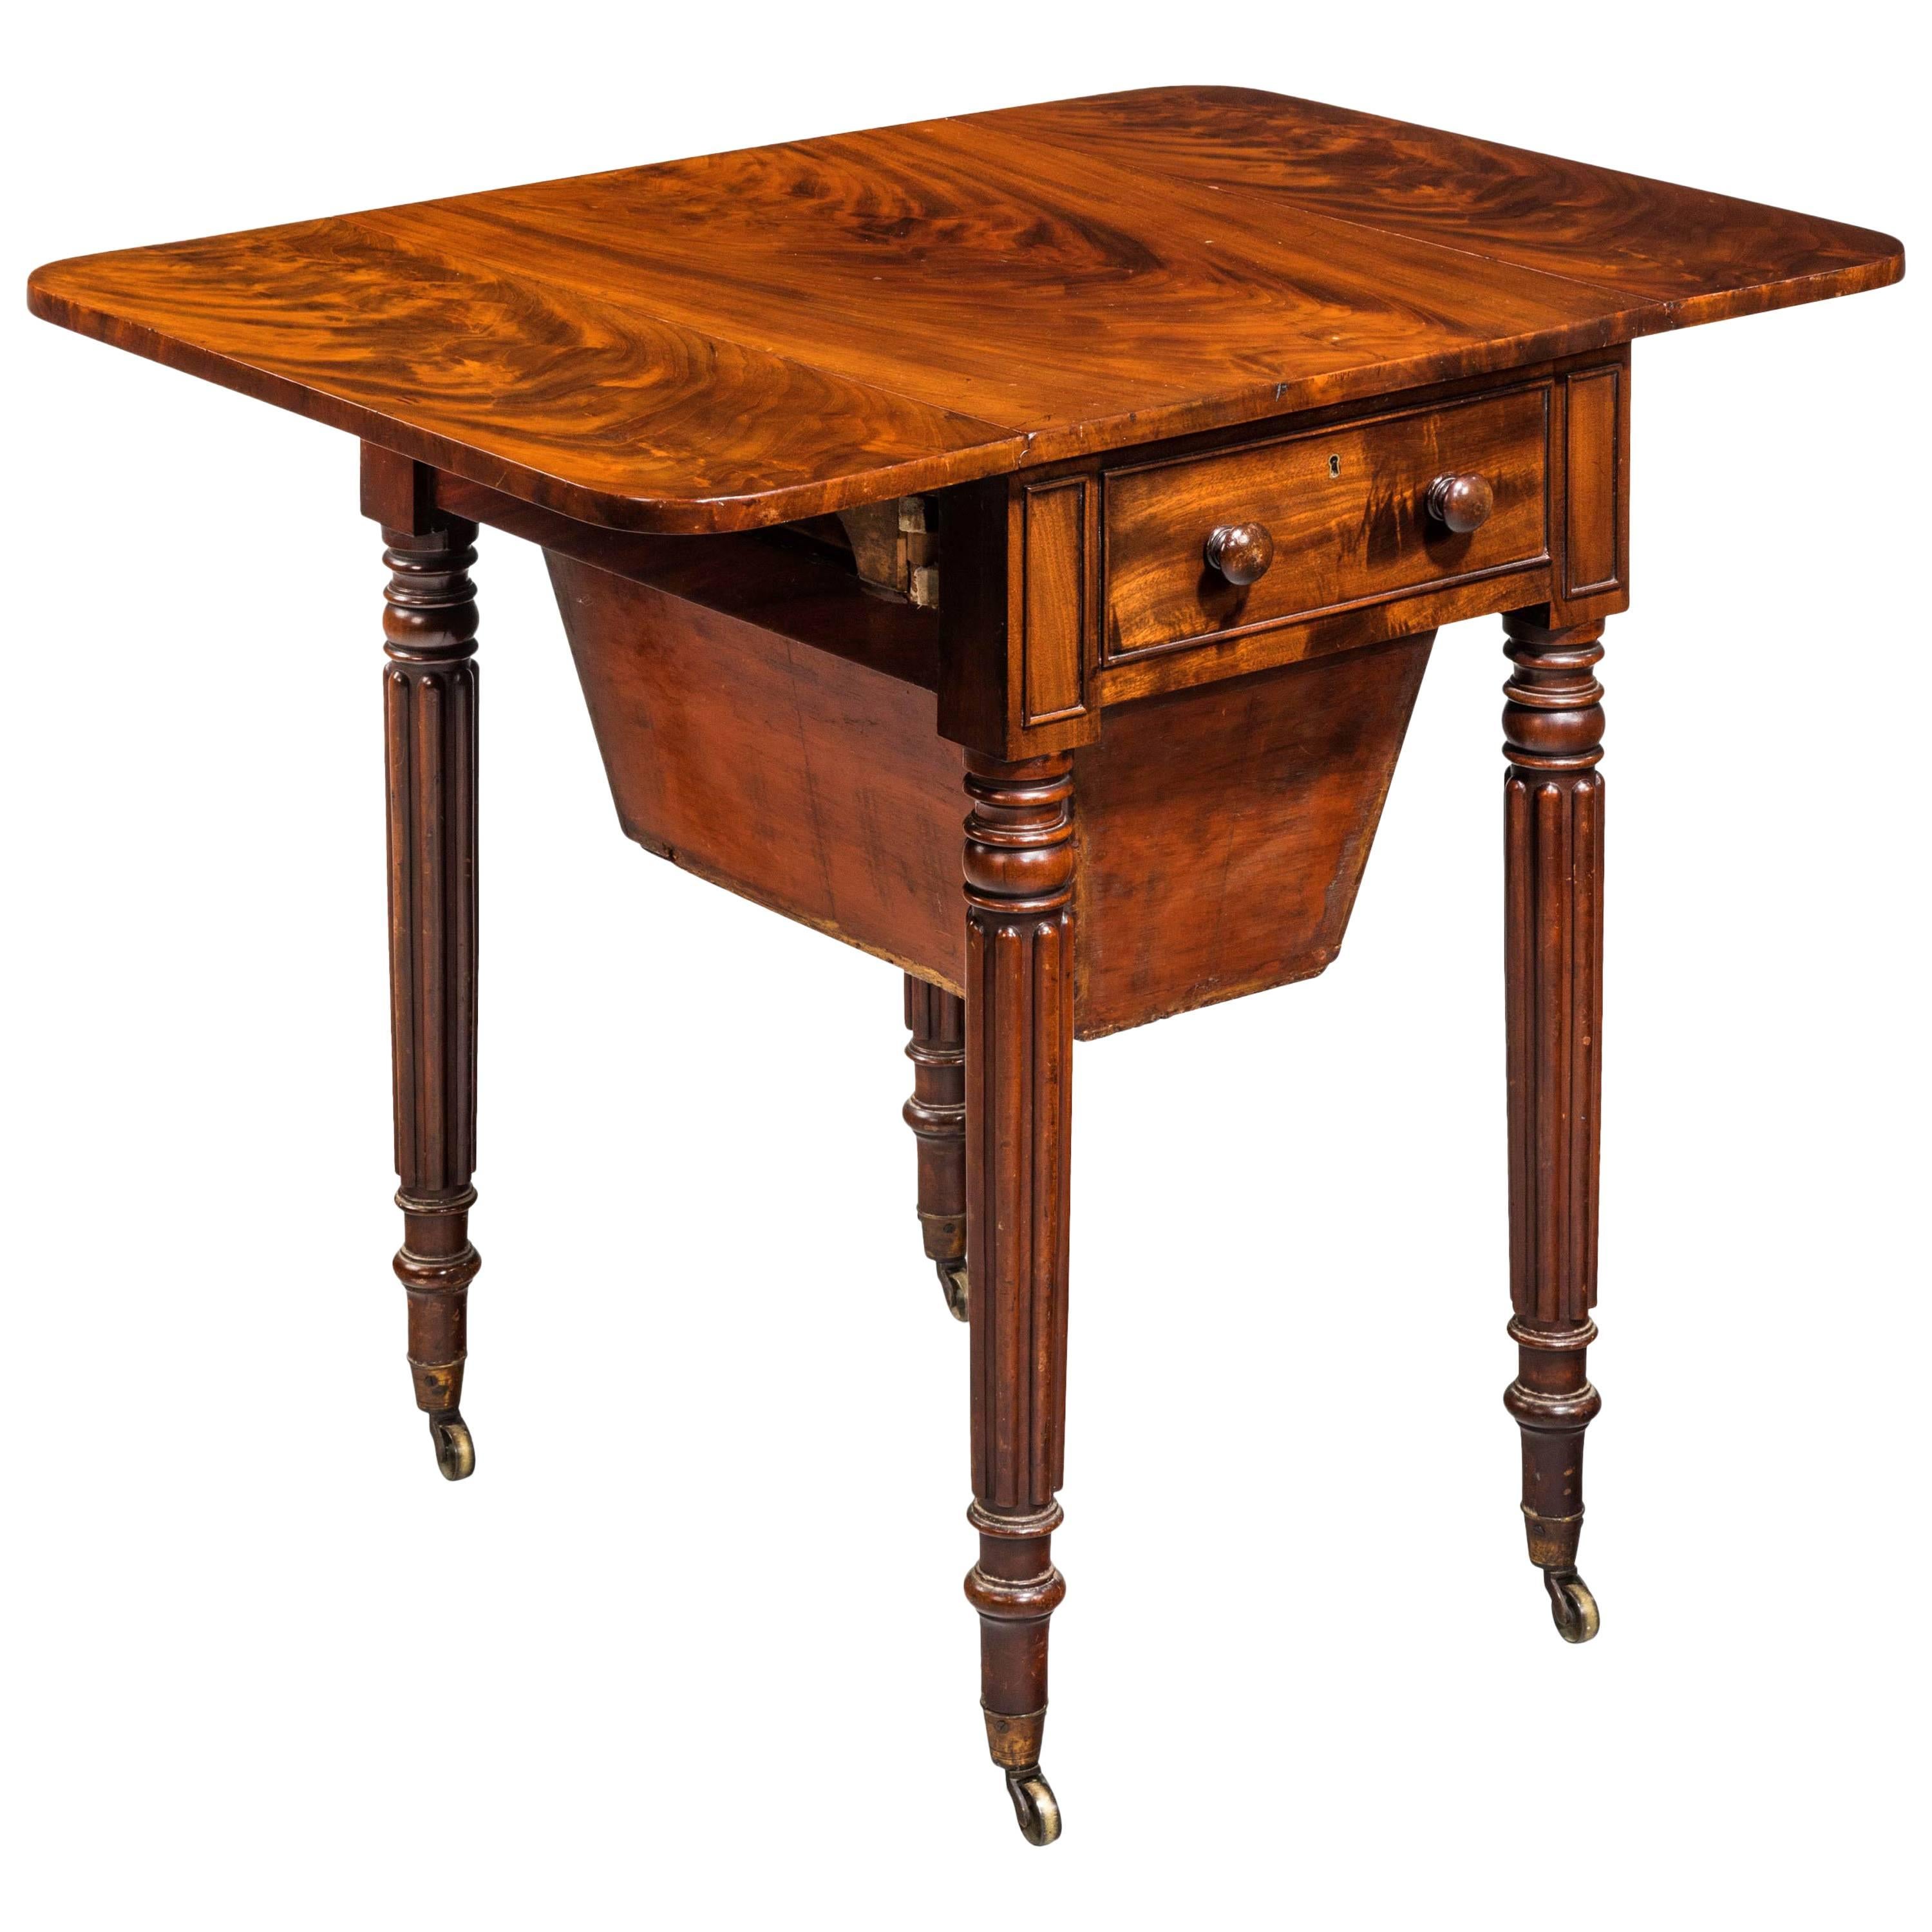 Regency Period Mahogany Pembroke Work Table with a Sewing Basket